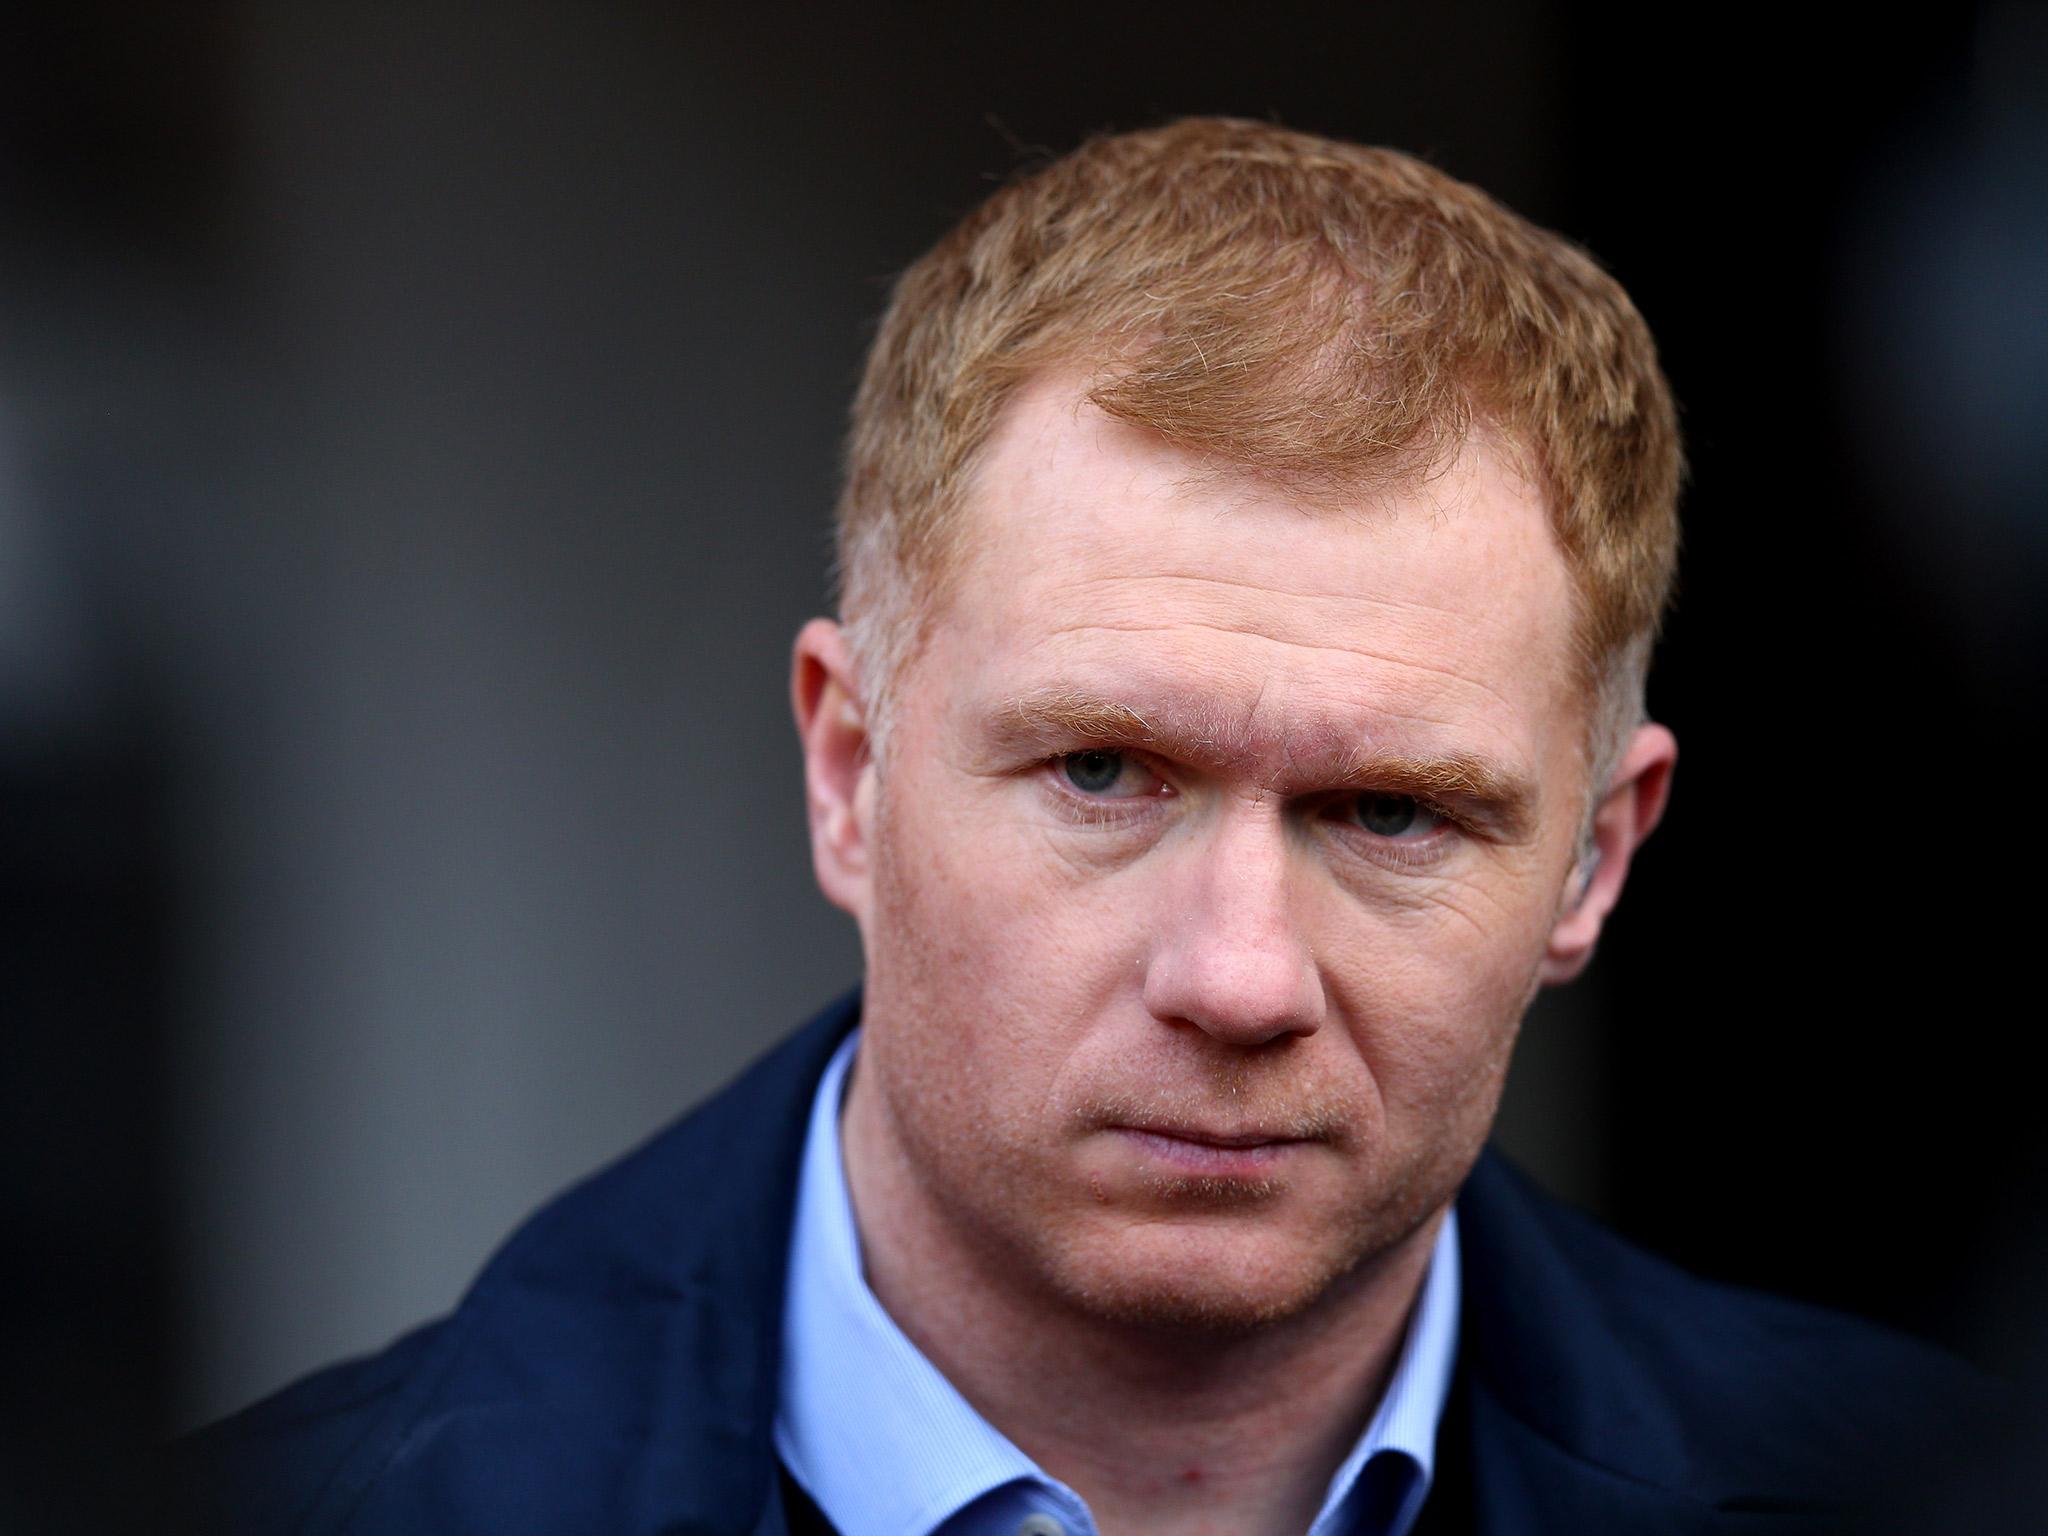 Paul Scholes ended his playing career in May 2013